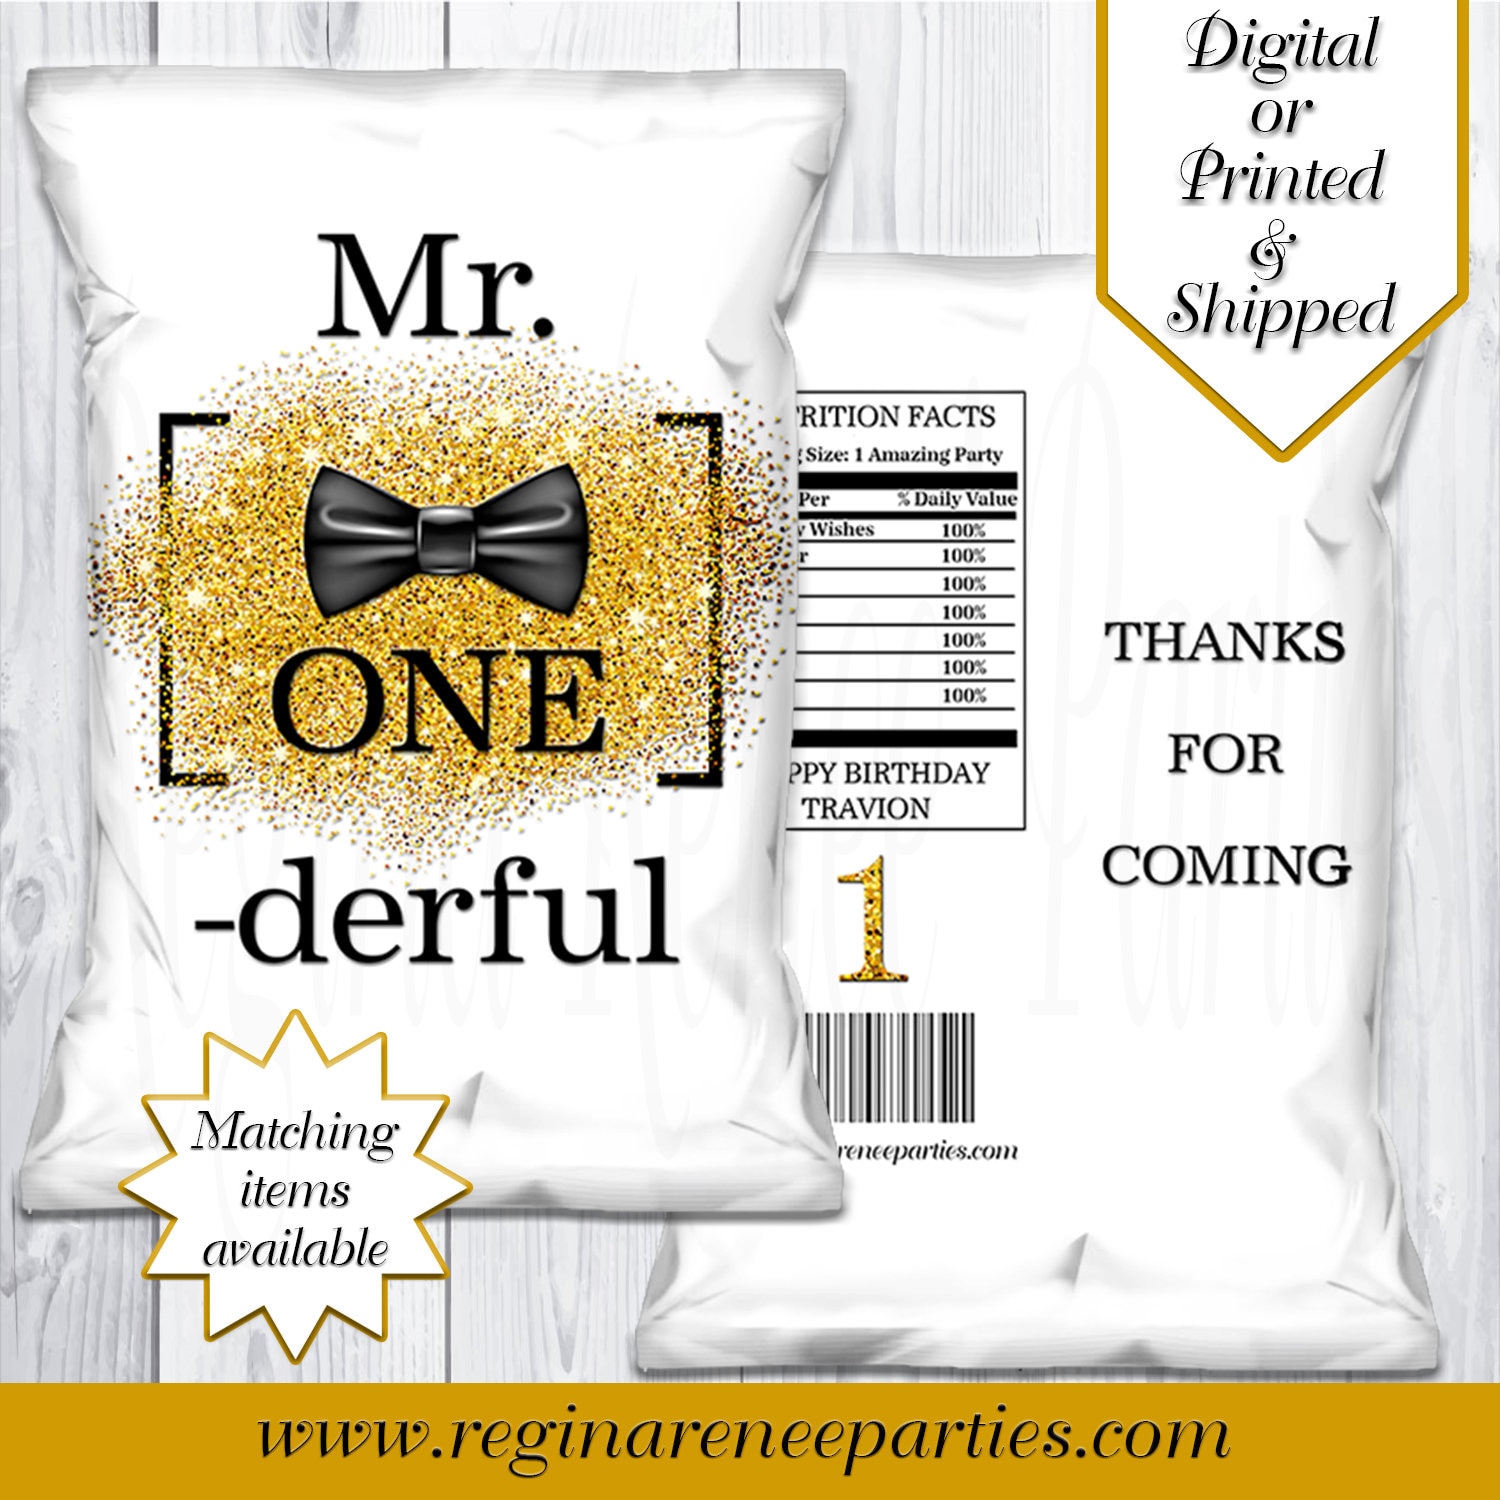 Personalized Treat Bags Printable Party Favors Custom Chip Bag Mr ONEderful Favor Bag Mr ONEderful First Birthday Party Chip Bag